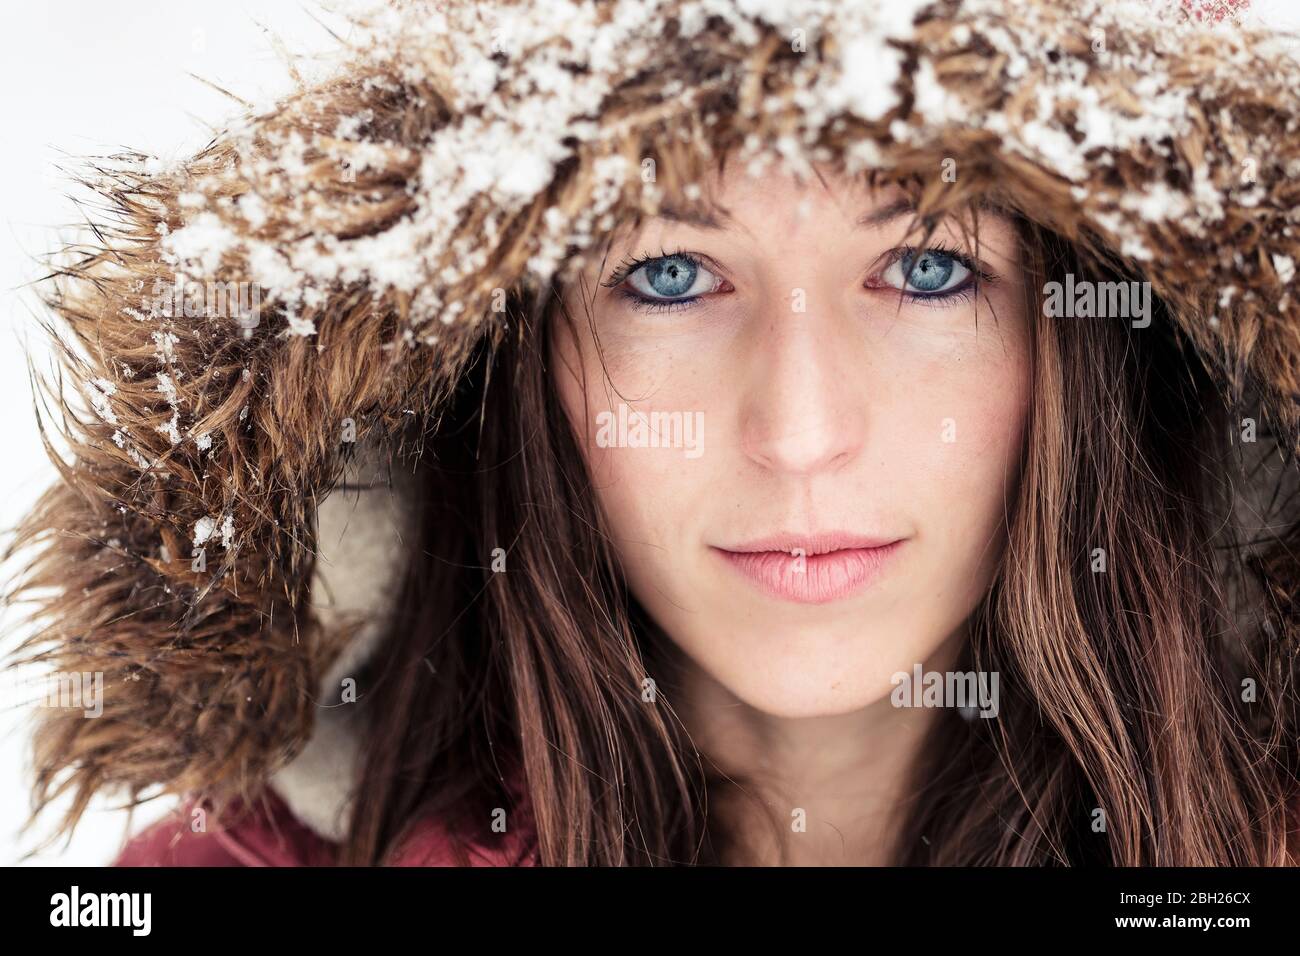 Portrait of young woman with blue eyes in winter Stock Photo